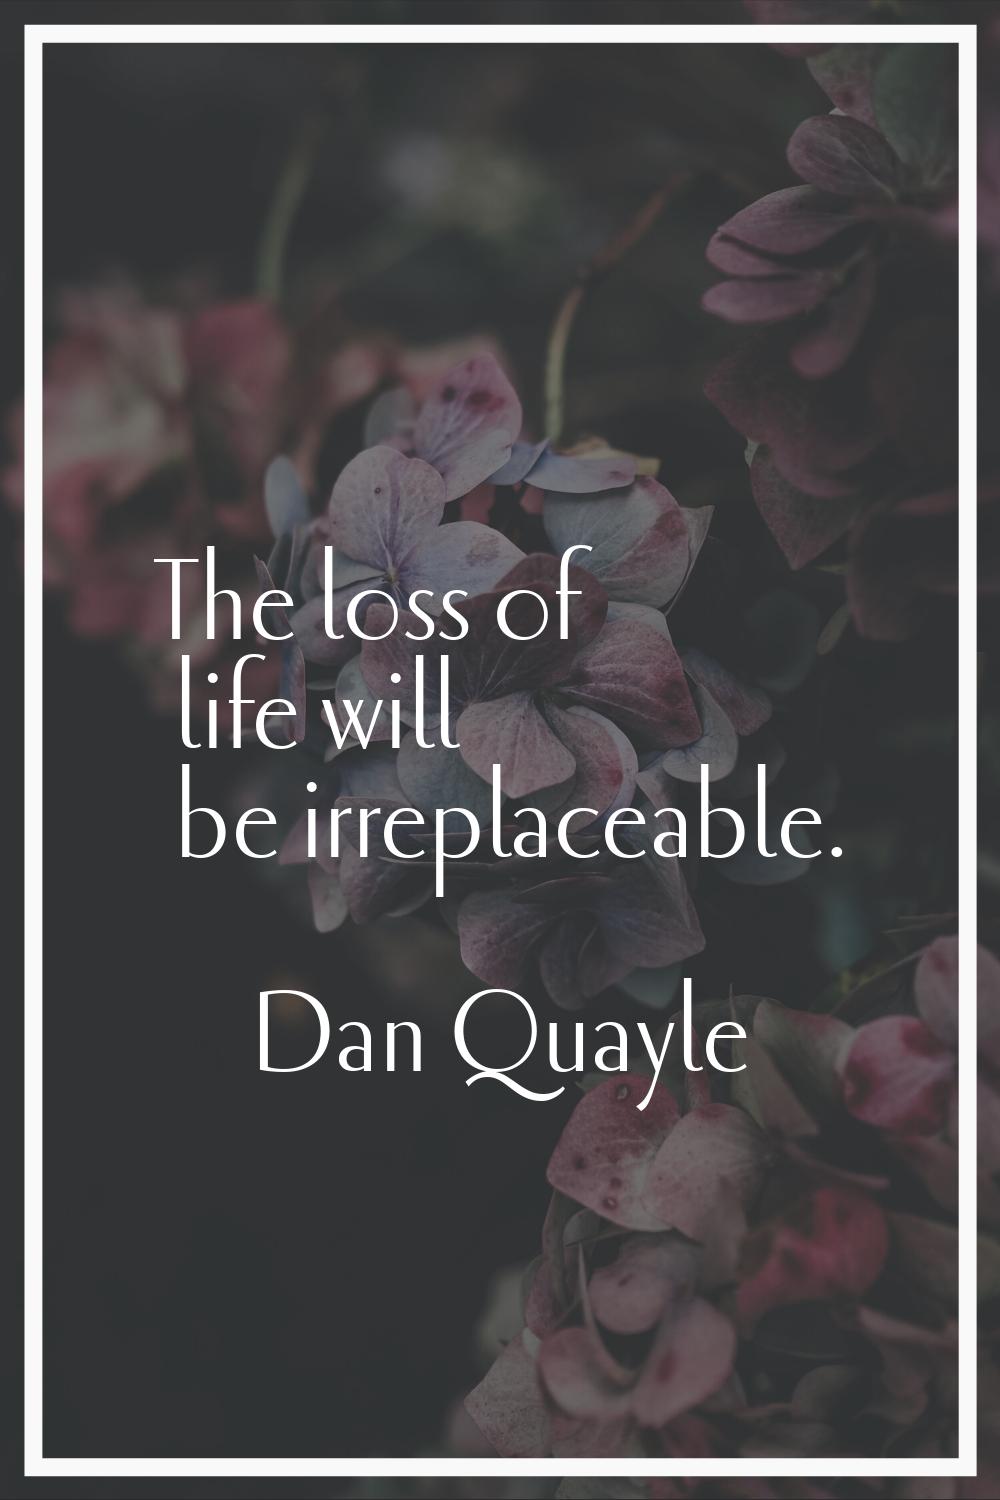 The loss of life will be irreplaceable.